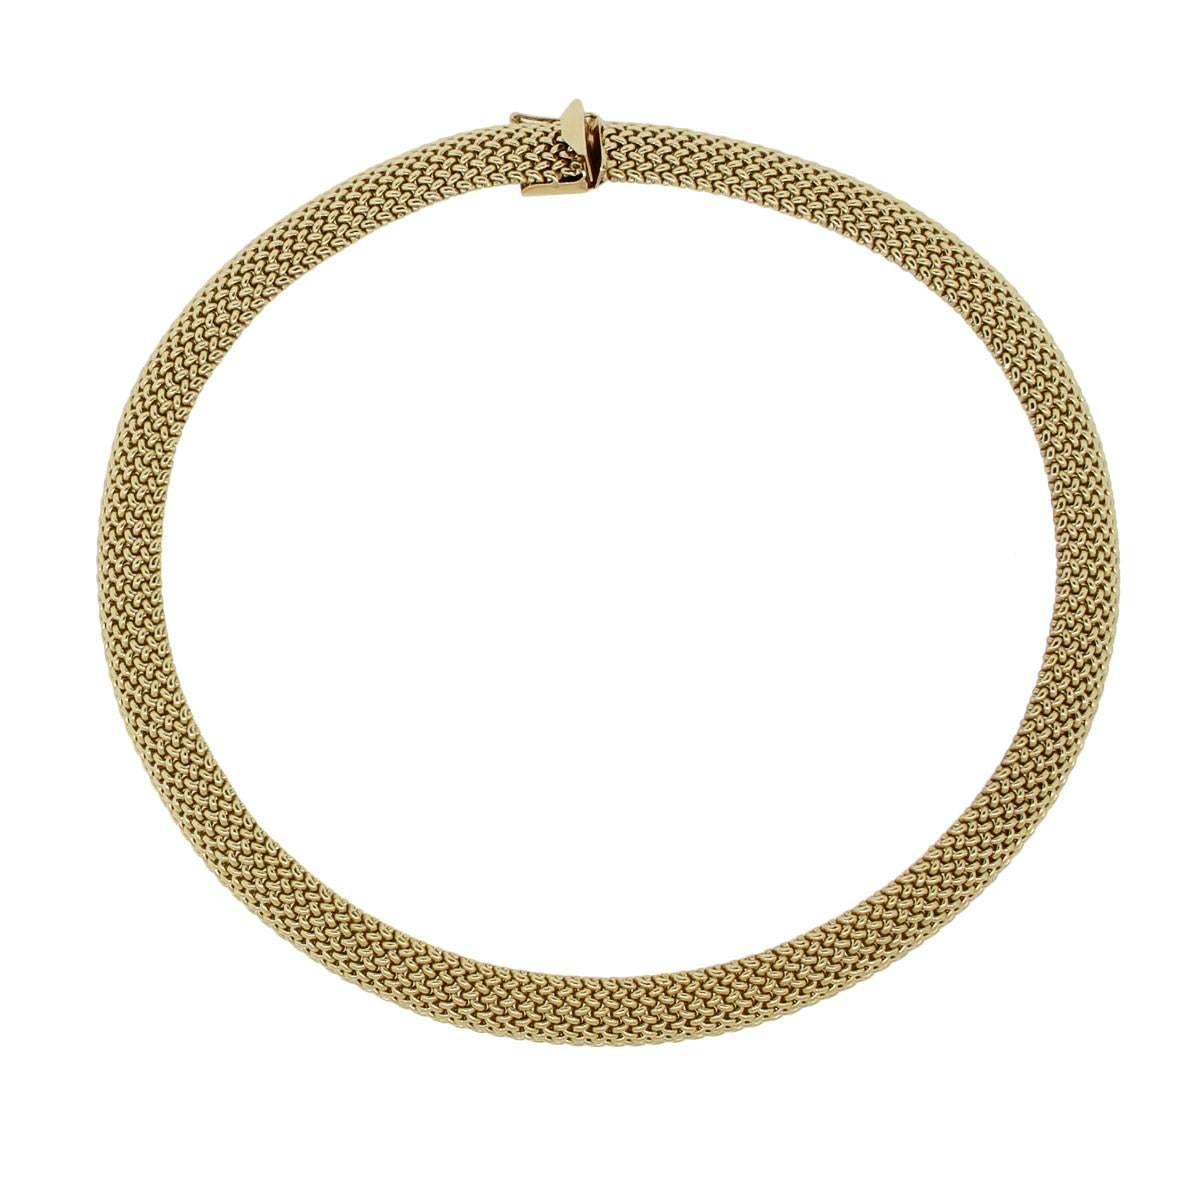 Material: 14k yellow gold
Measurements: Necklace is 18″ long
Fastening: Tongue in box with safety clasp
Additional Details: This item comes with a presentation box!
SKU: G7248